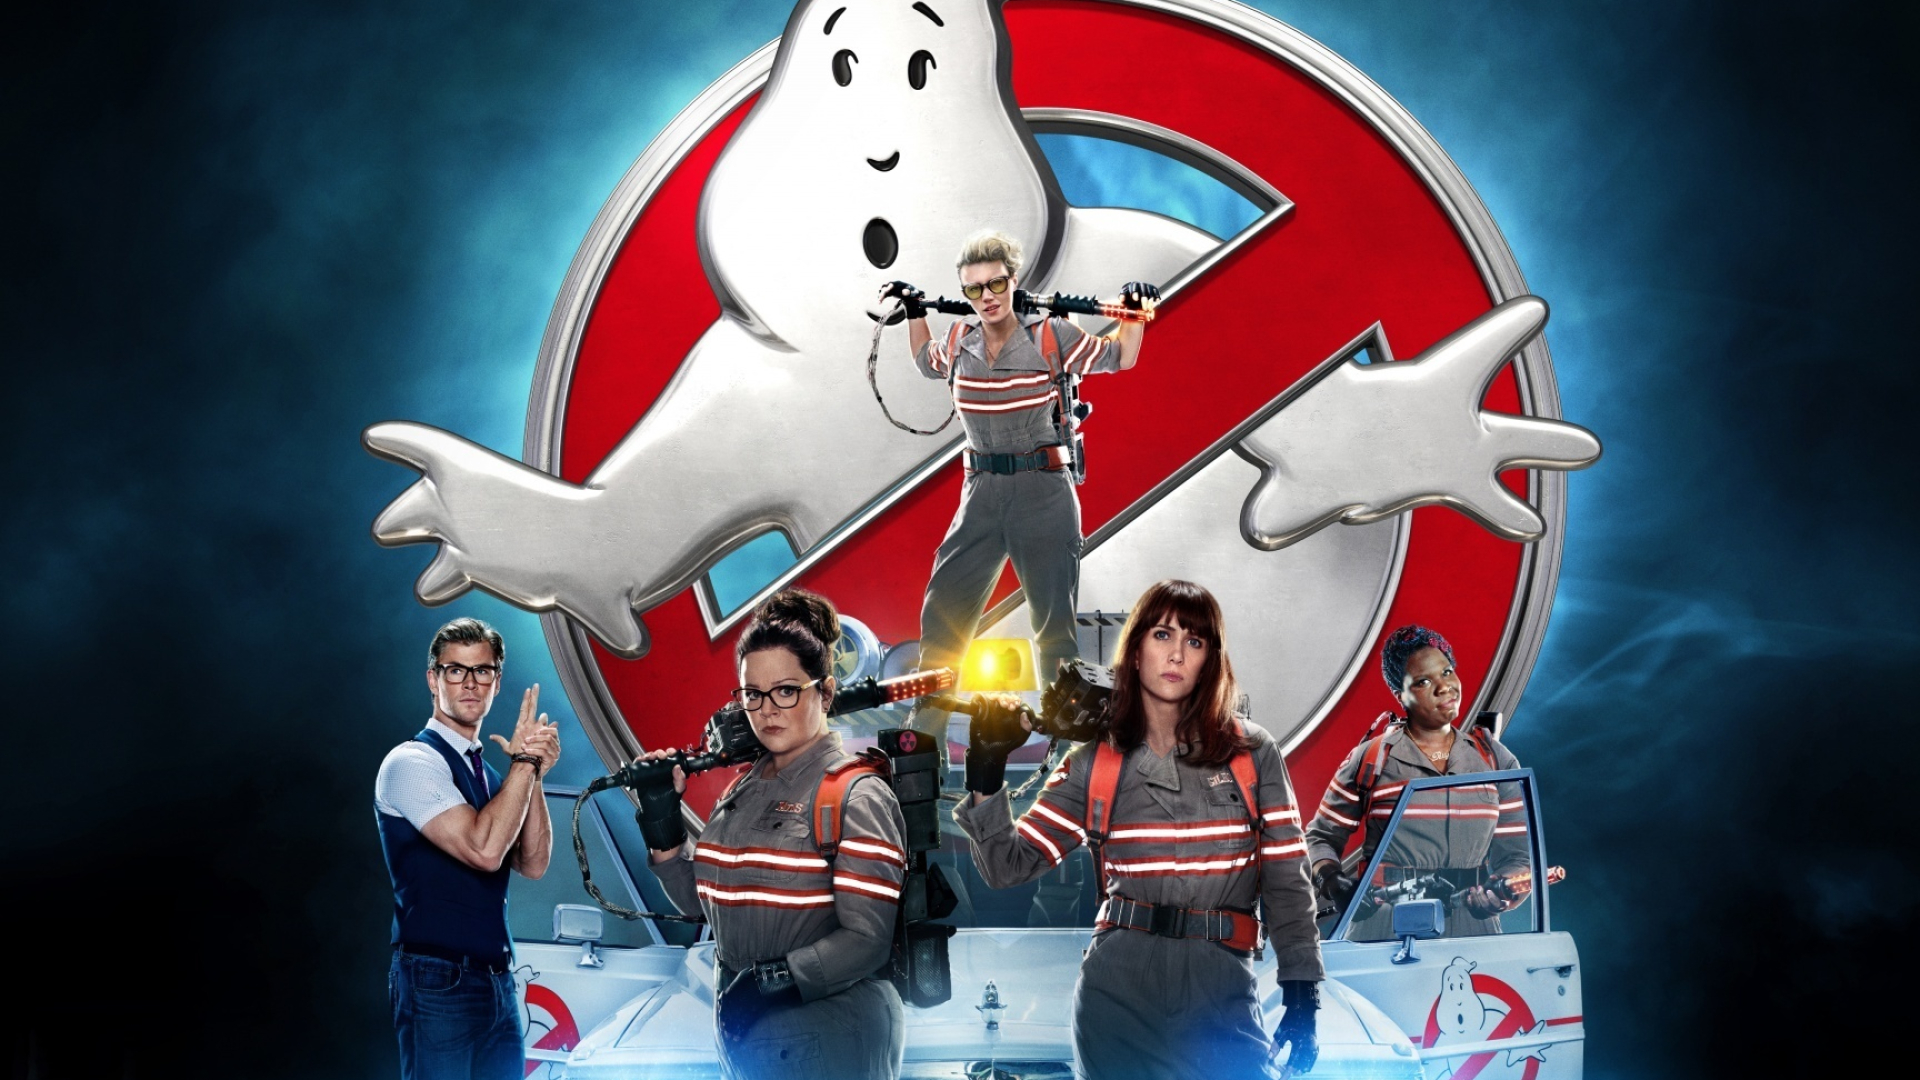 Ghostbusters: Produced by Columbia Pictures in association with Village Roadshow Pictures, 2016. 1920x1080 Full HD Background.